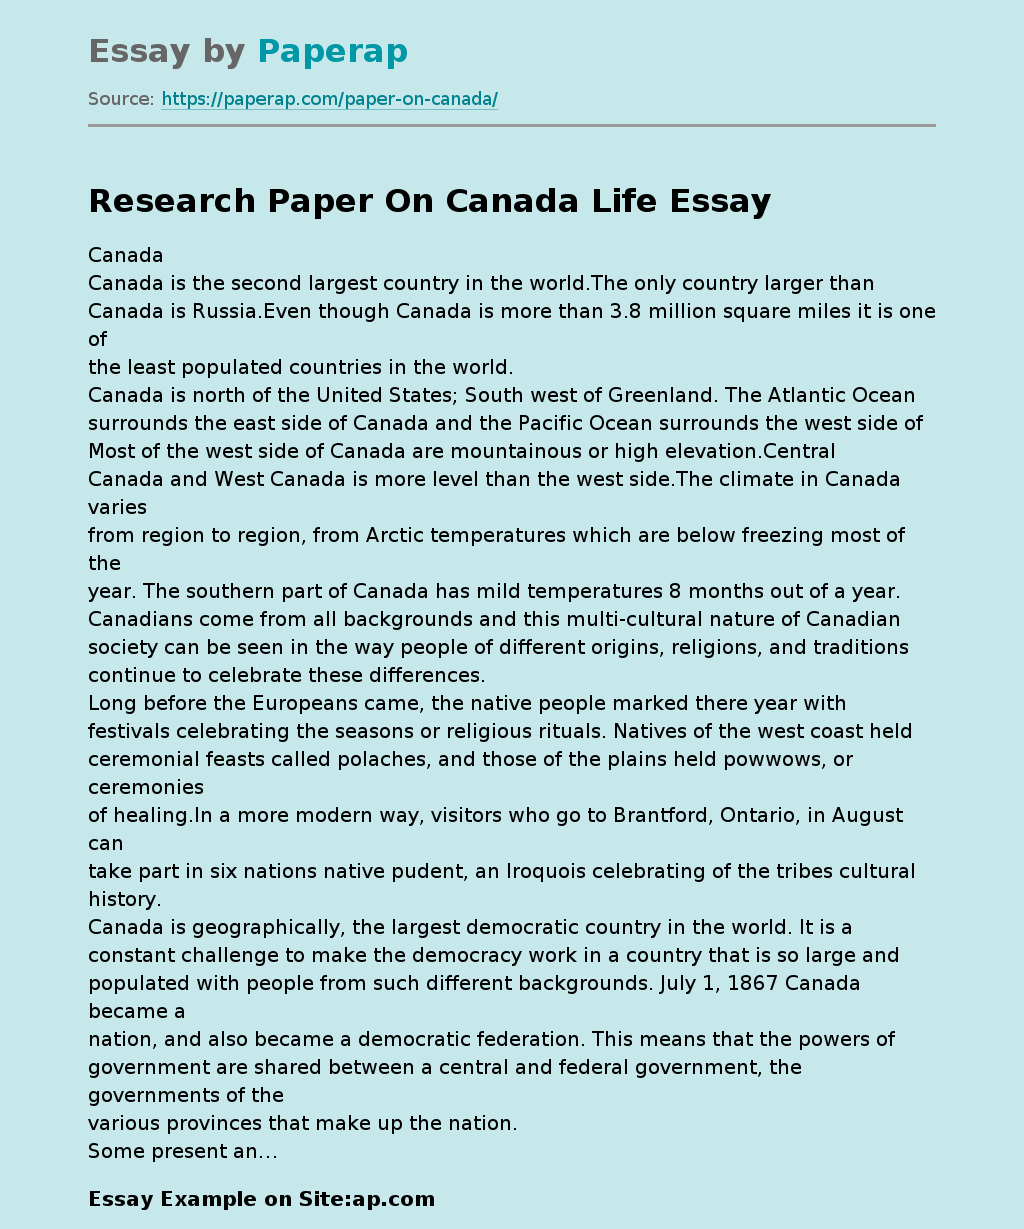 Research Paper On Canada Life